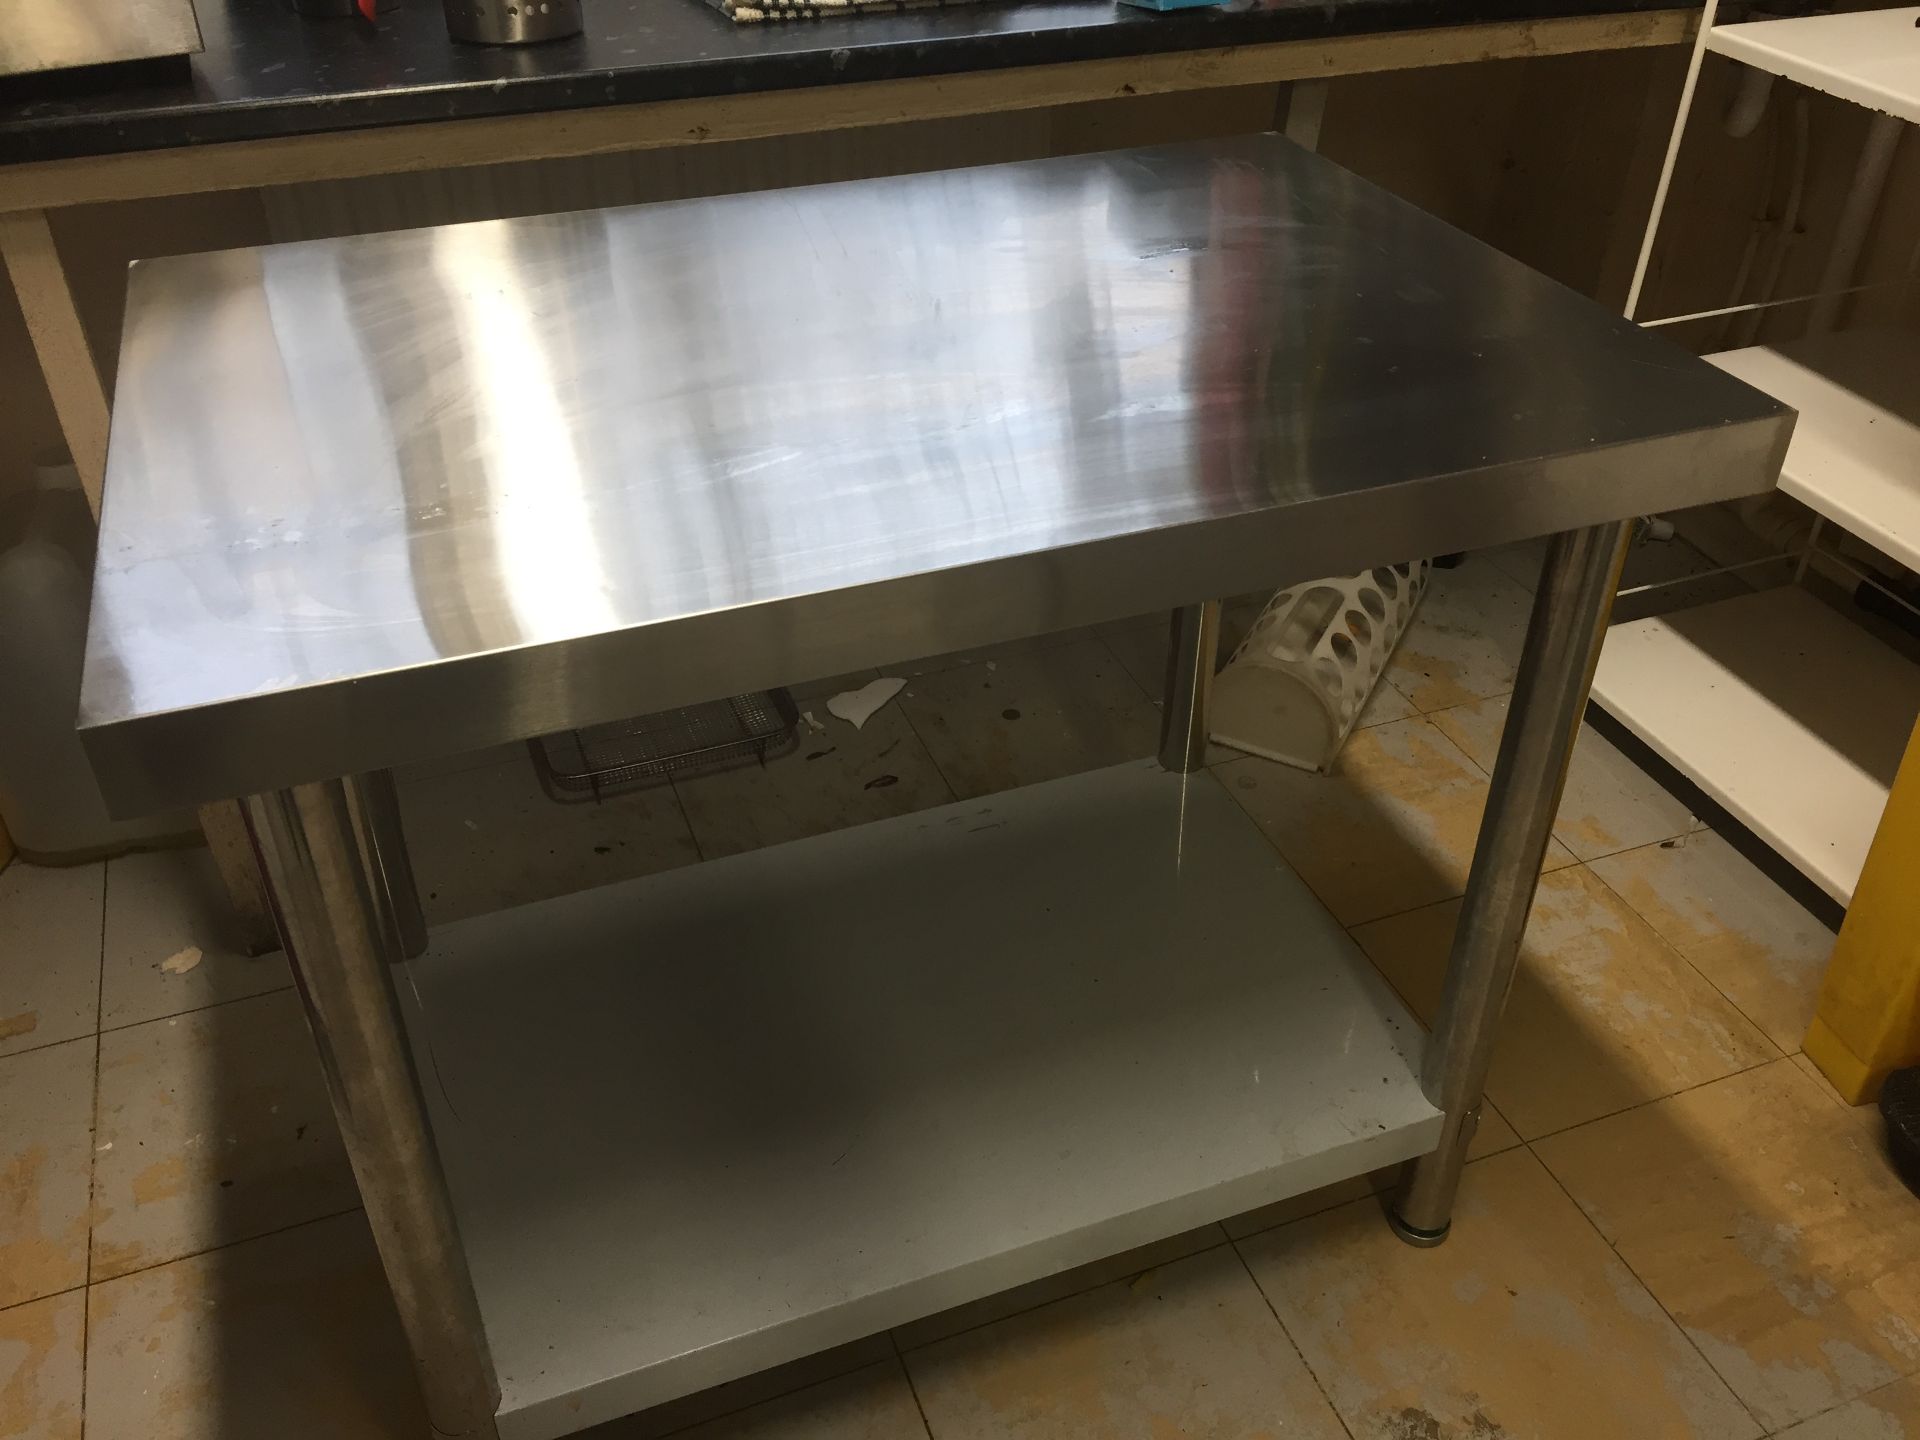 Stainless Steel Work Surface/Shelf Unit